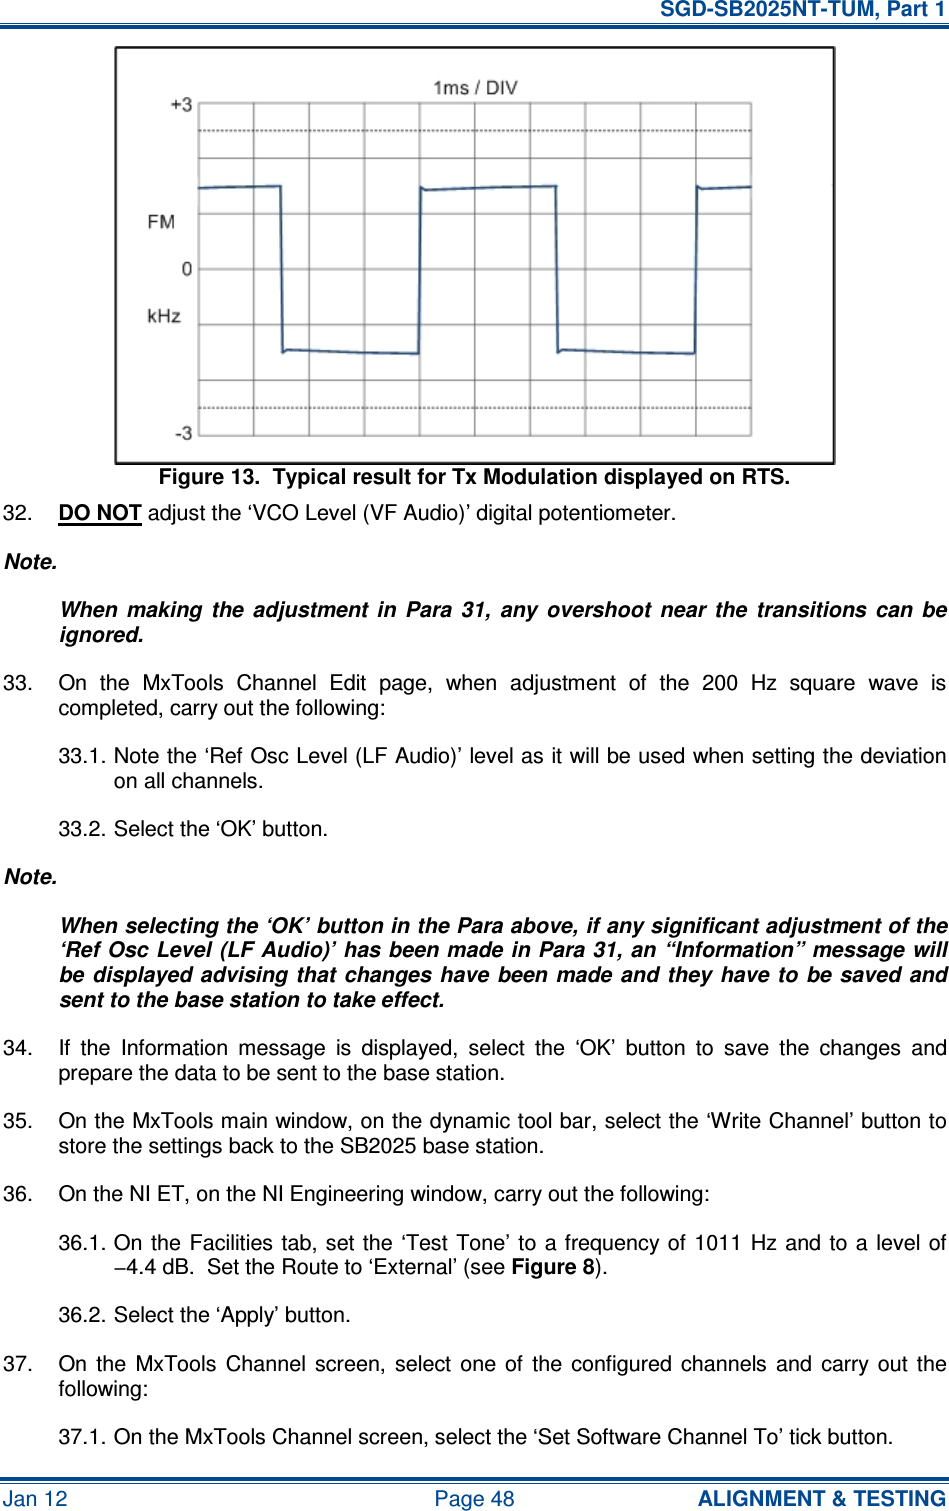   SGD-SB2025NT-TUM, Part 1 Jan 12  Page 48  ALIGNMENT &amp; TESTING Figure 13.  Typical result for Tx Modulation displayed on RTS. 32.  DO NOT adjust the ‘VCO Level (VF Audio)’ digital potentiometer. Note. When  making  the  adjustment  in  Para  31,  any  overshoot  near  the  transitions  can  be ignored. 33.  On  the  MxTools  Channel  Edit  page,  when  adjustment  of  the  200  Hz  square  wave  is completed, carry out the following: 33.1. Note the ‘Ref Osc Level (LF Audio)’ level as it will be used when setting the deviation on all channels. 33.2. Select the ‘OK’ button. Note. When selecting the ‘OK’ button in the Para above, if any significant adjustment of the ‘Ref Osc Level (LF Audio)’ has been made in Para 31, an “Information” message will be displayed advising  that  changes have  been made and  they have to be saved and sent to the base station to take effect. 34.  If  the  Information  message  is  displayed,  select  the  ‘OK’  button  to  save  the  changes  and prepare the data to be sent to the base station. 35.  On the MxTools main window, on the dynamic tool bar, select the ‘Write Channel’ button to store the settings back to the SB2025 base station. 36.  On the NI ET, on the NI Engineering window, carry out the following: 36.1. On the  Facilities tab, set the  ‘Test  Tone’ to a frequency of  1011  Hz and to a level of −4.4 dB.  Set the Route to ‘External’ (see Figure 8). 36.2. Select the ‘Apply’ button. 37.  On  the  MxTools  Channel  screen,  select  one  of  the  configured  channels  and  carry  out  the following: 37.1. On the MxTools Channel screen, select the ‘Set Software Channel To’ tick button. 